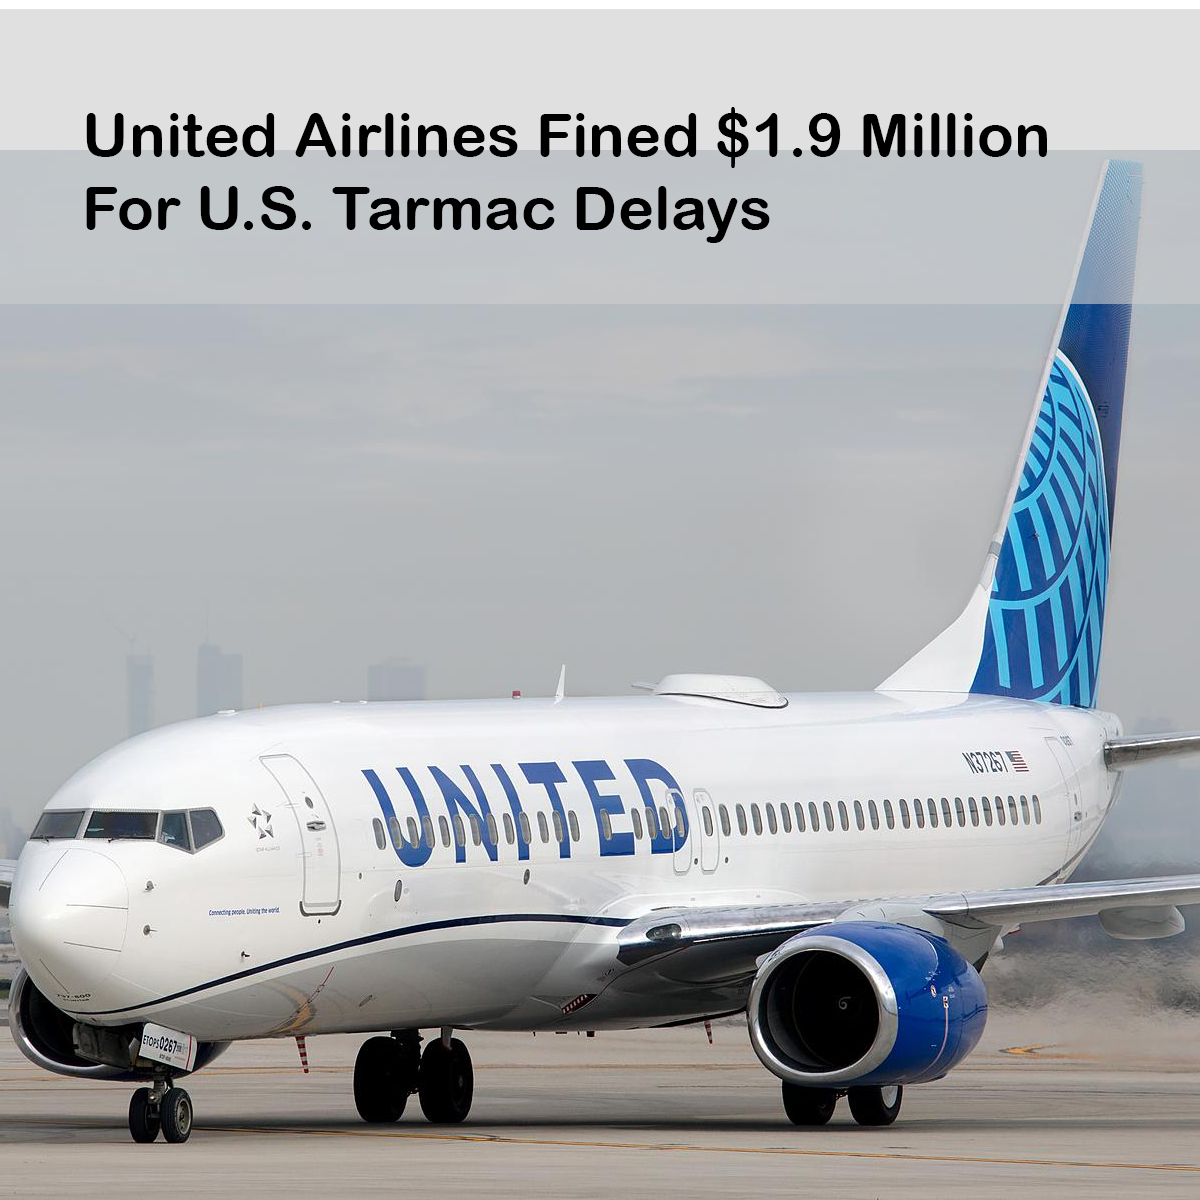 United Airlines Fined $1.9 Million For U.S. Tarmac Delays